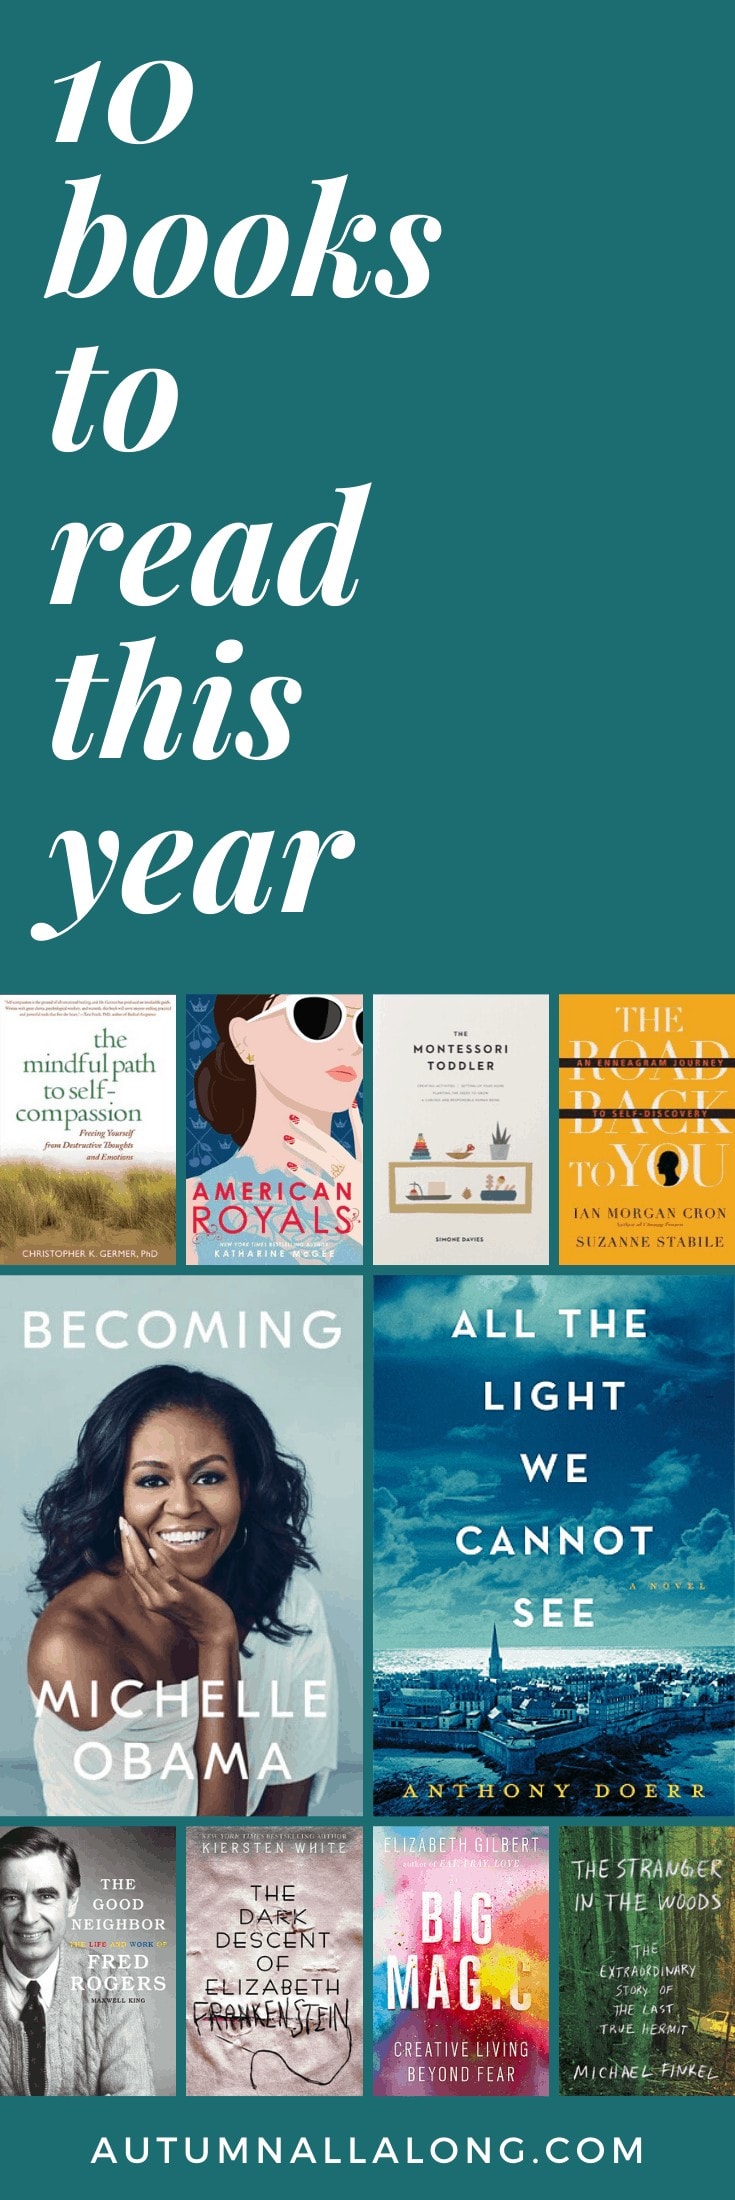 10 books to read this year. | via Autumn All Along